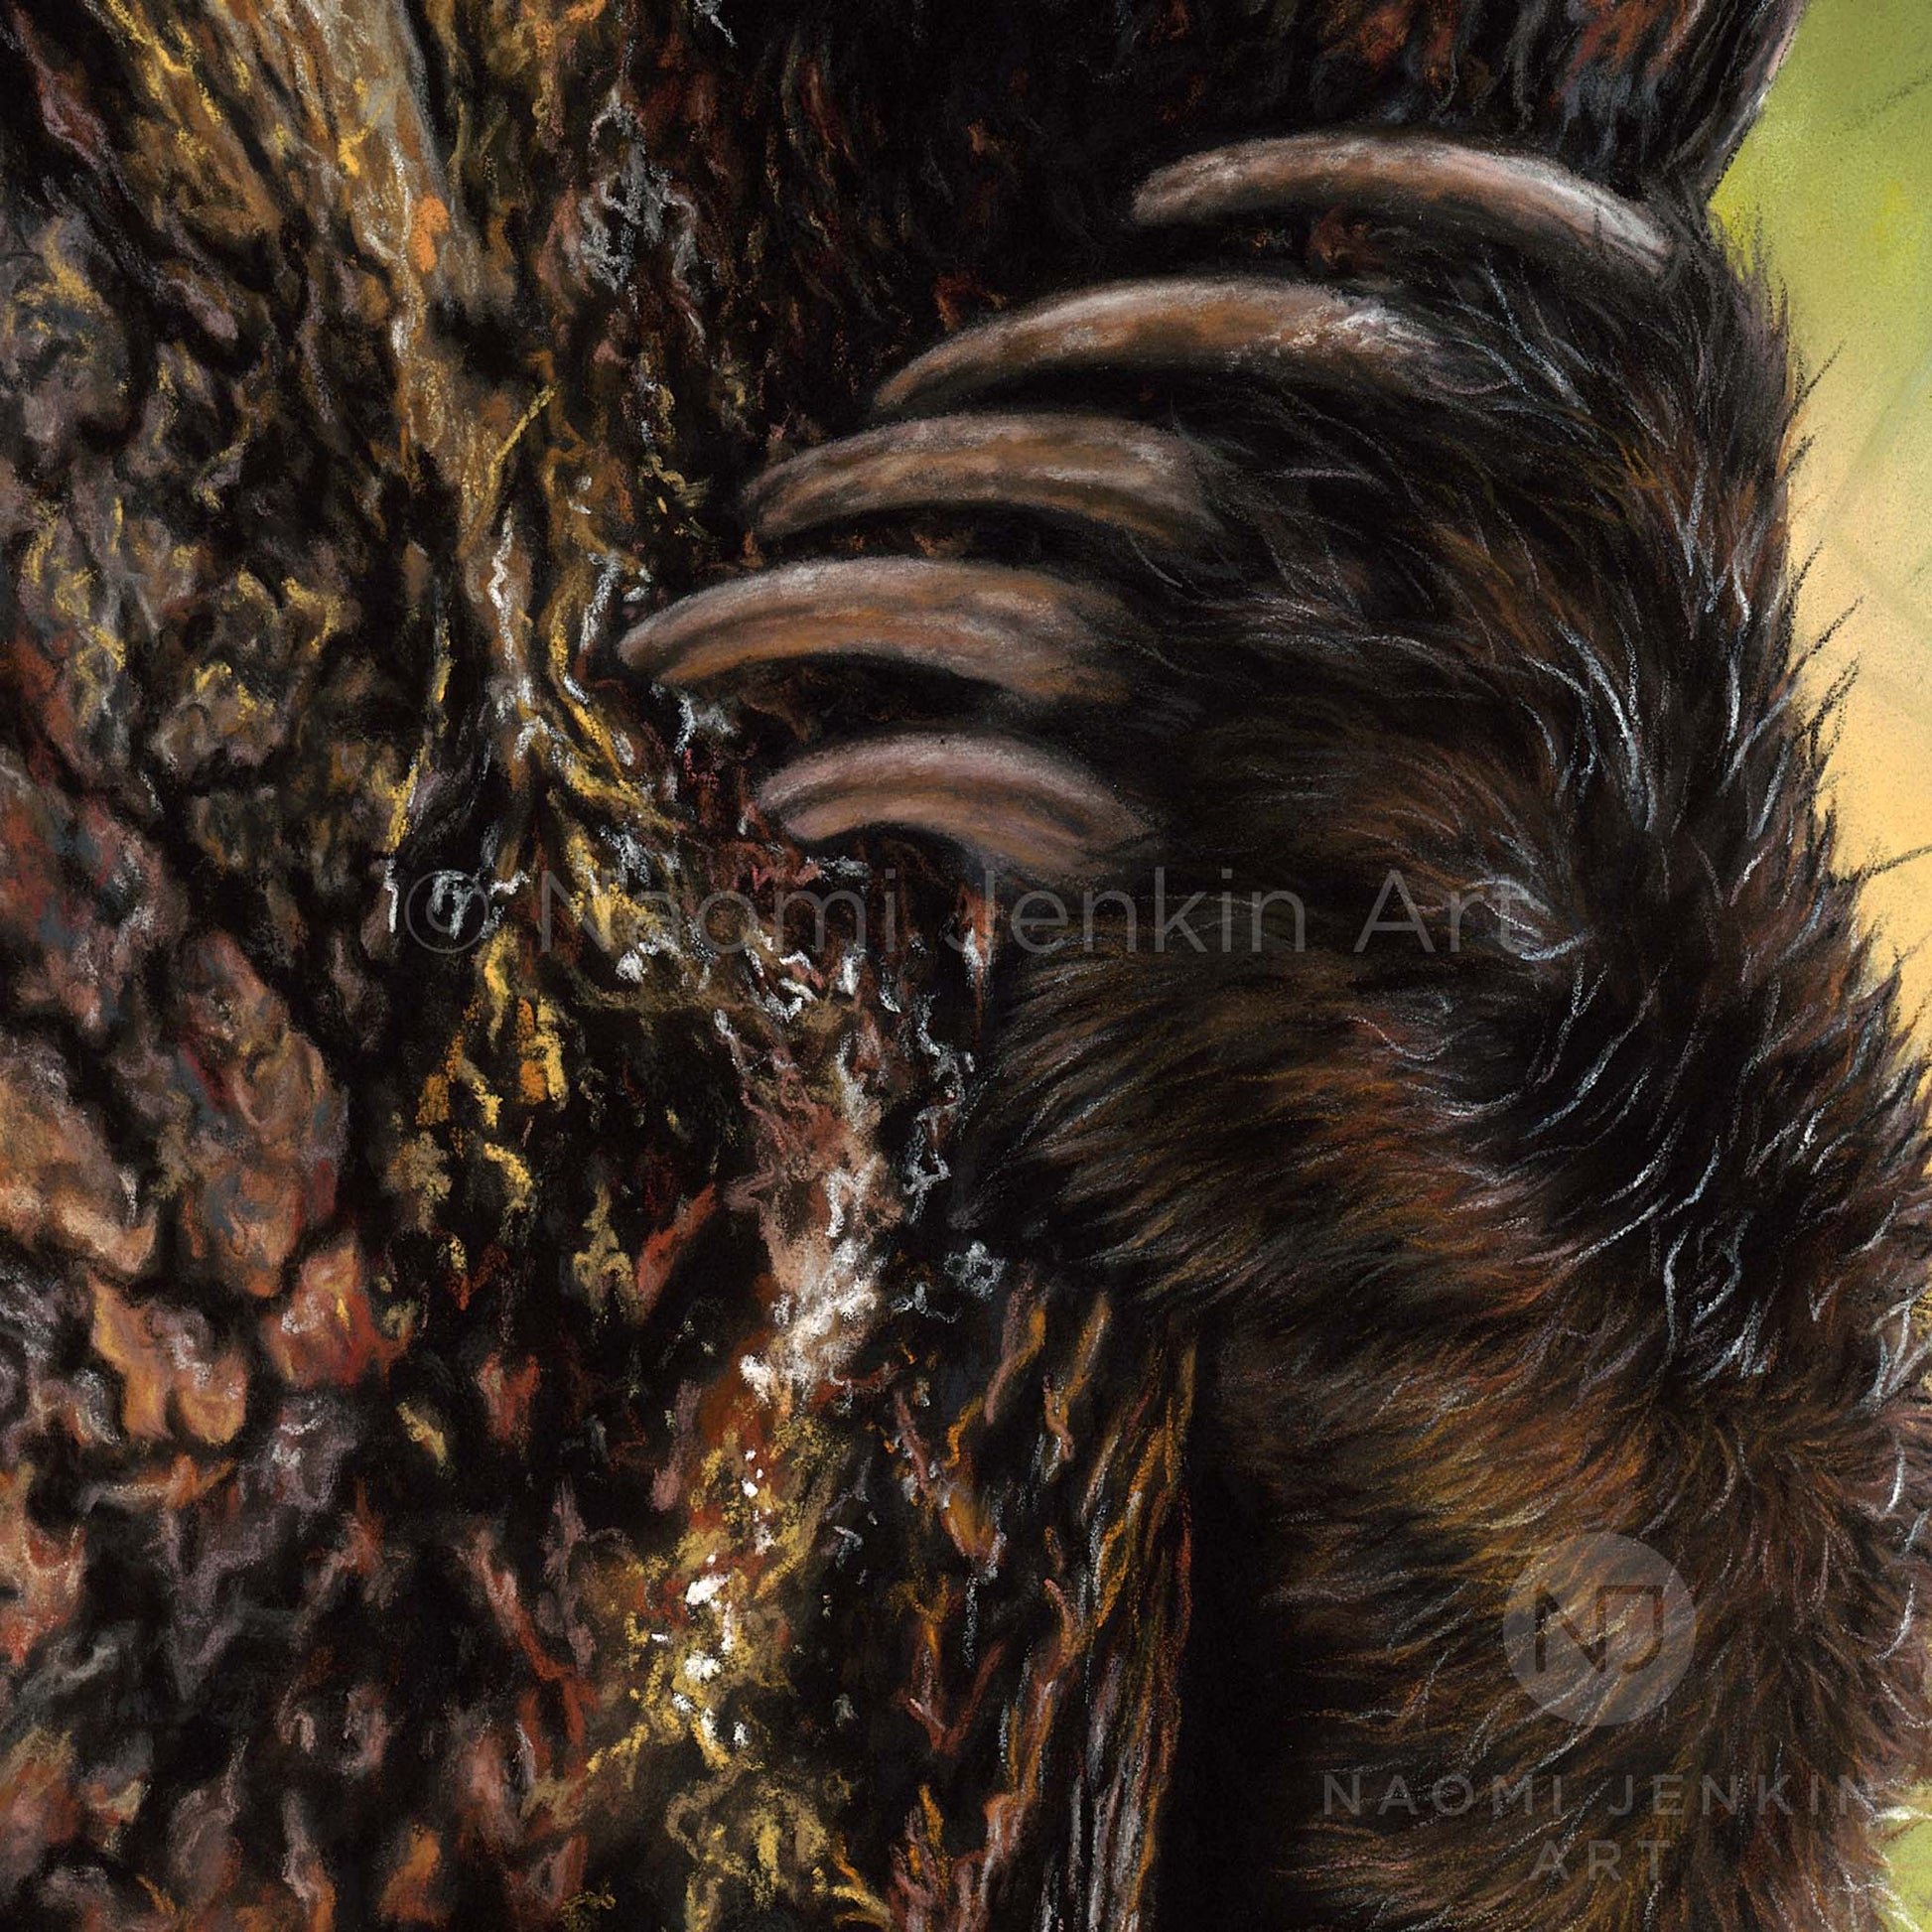 Bear claw close up drawing from the 'Peekaboo' original painting by Naomi Jenkin